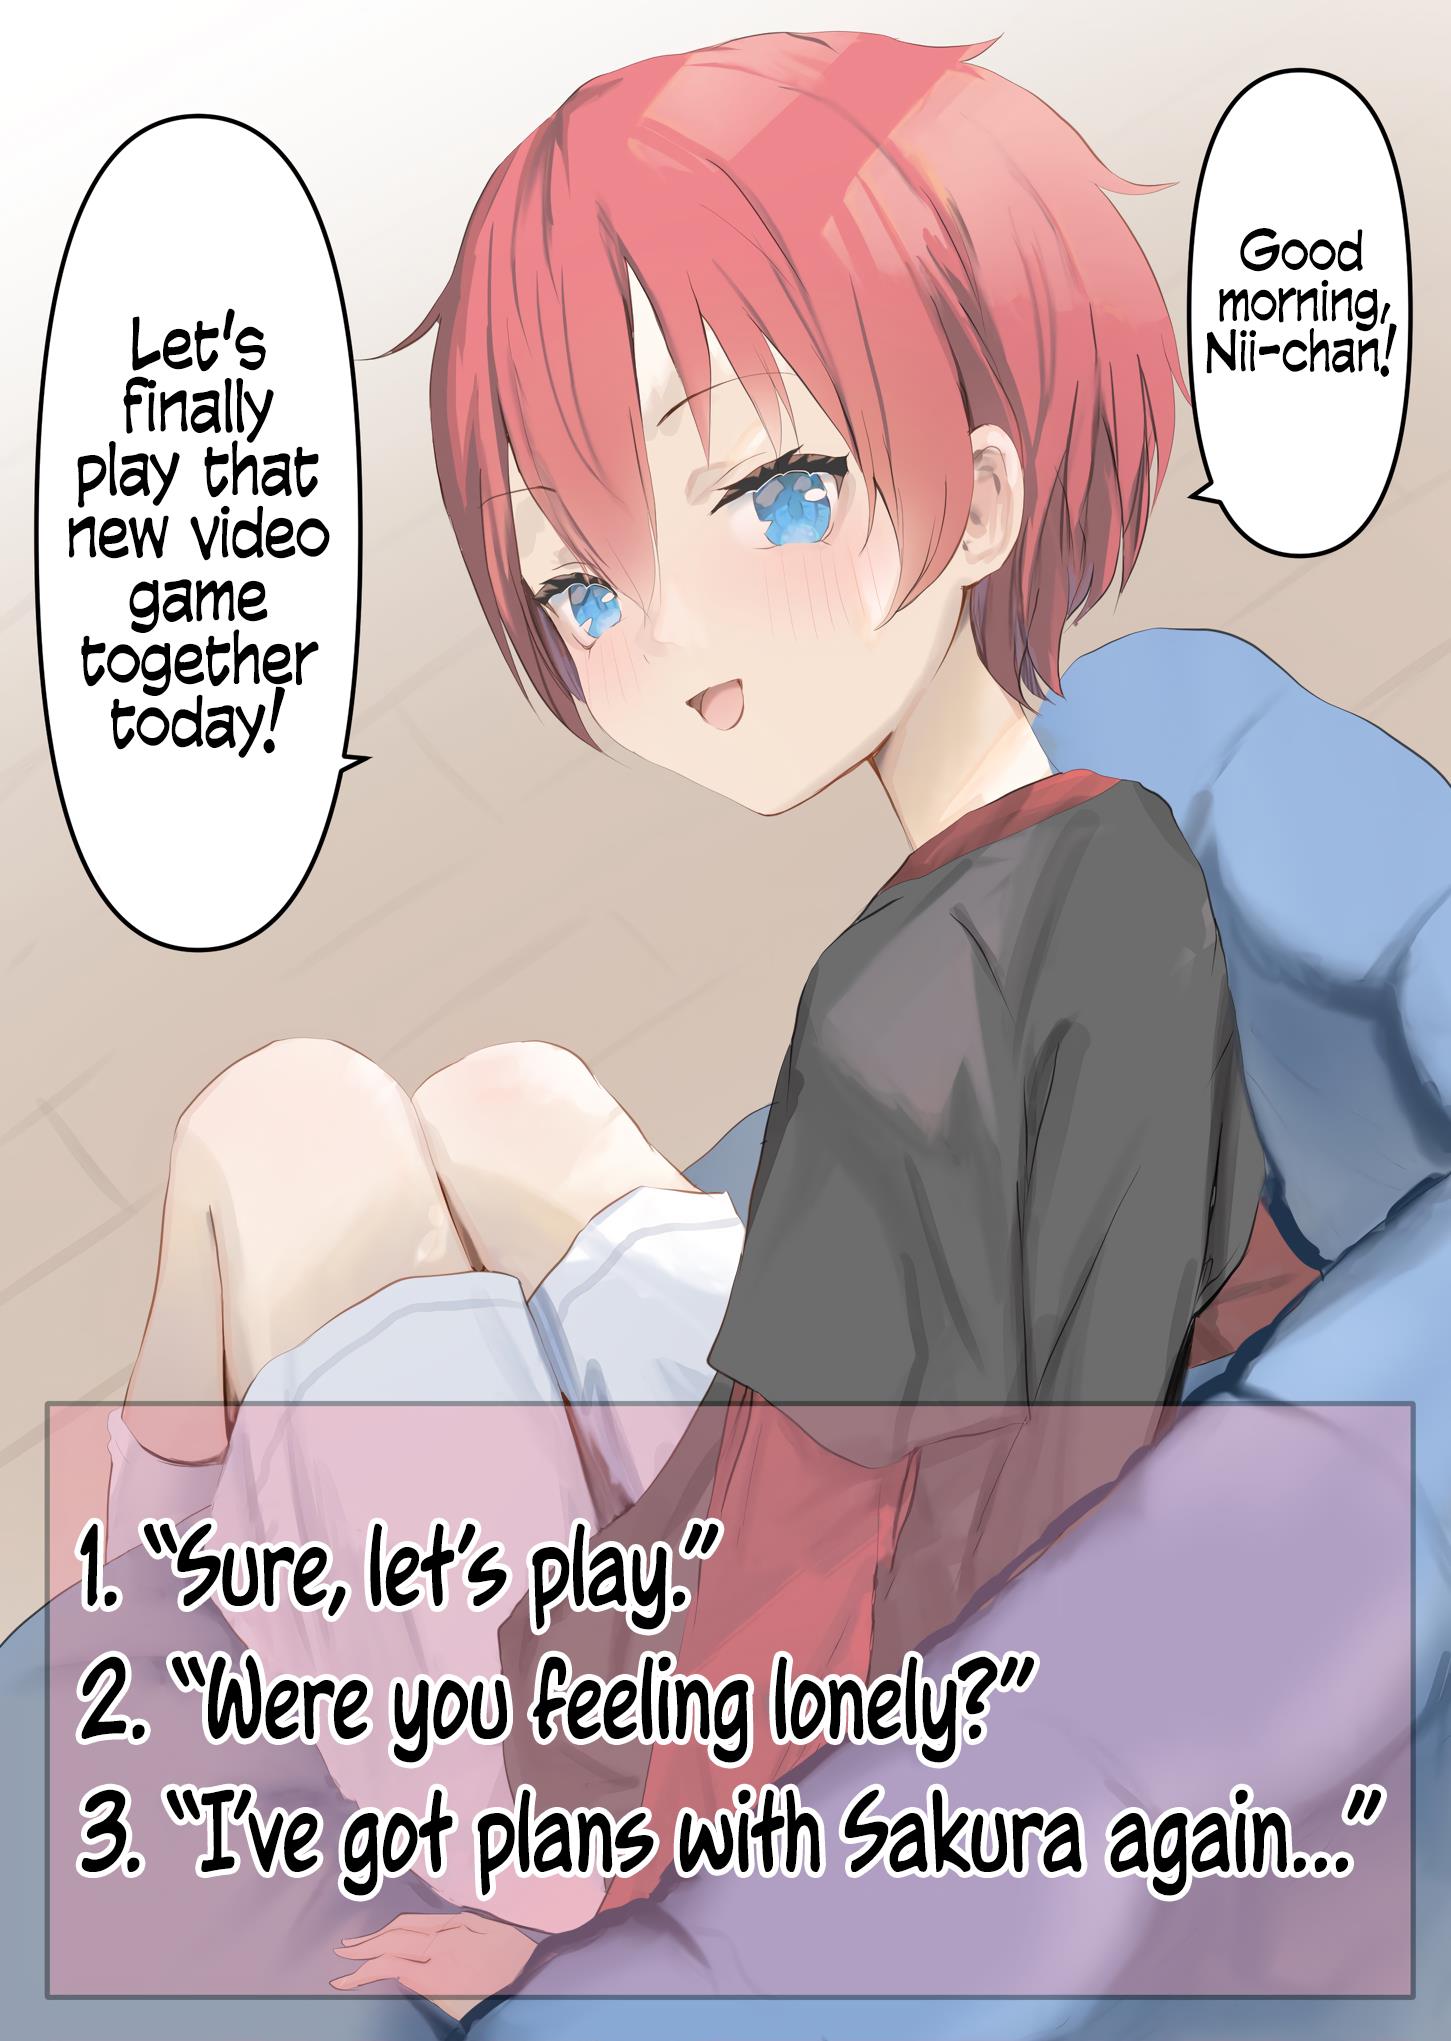 A Little Brother Who Becomes A Femboy Based On Your Choices - chapter 1 - #1